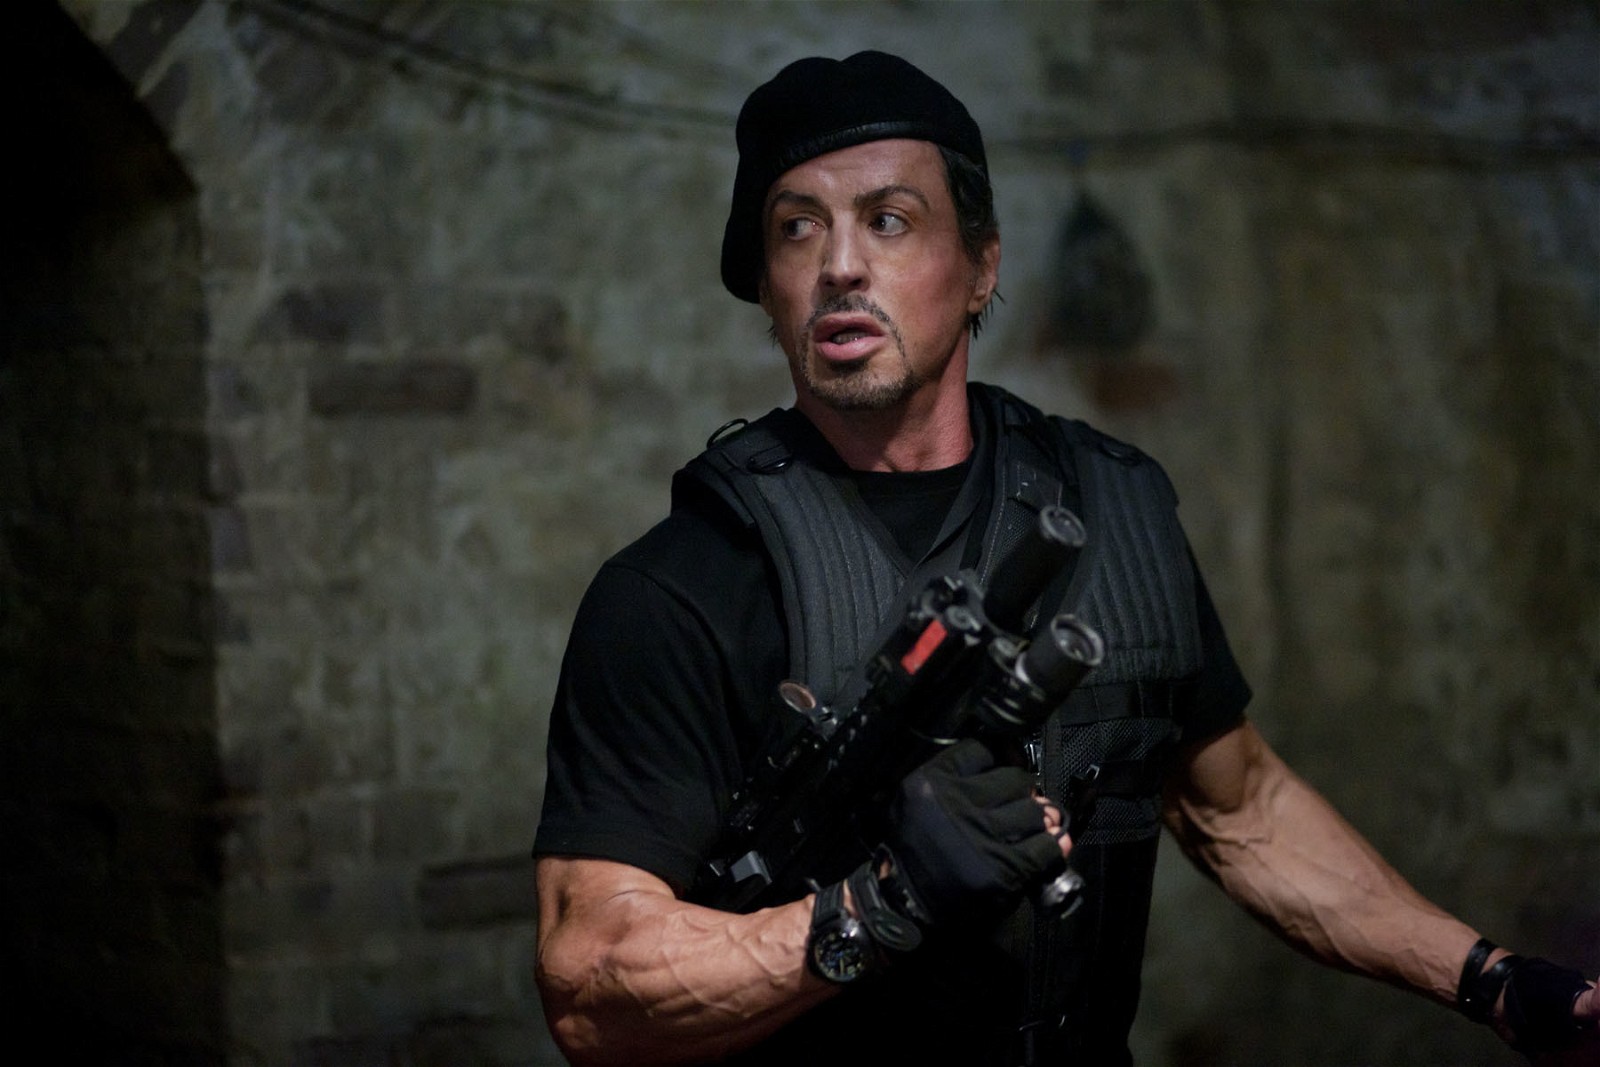 Sylvester Stallone as Barney Ross in a still from The Expendables franchise